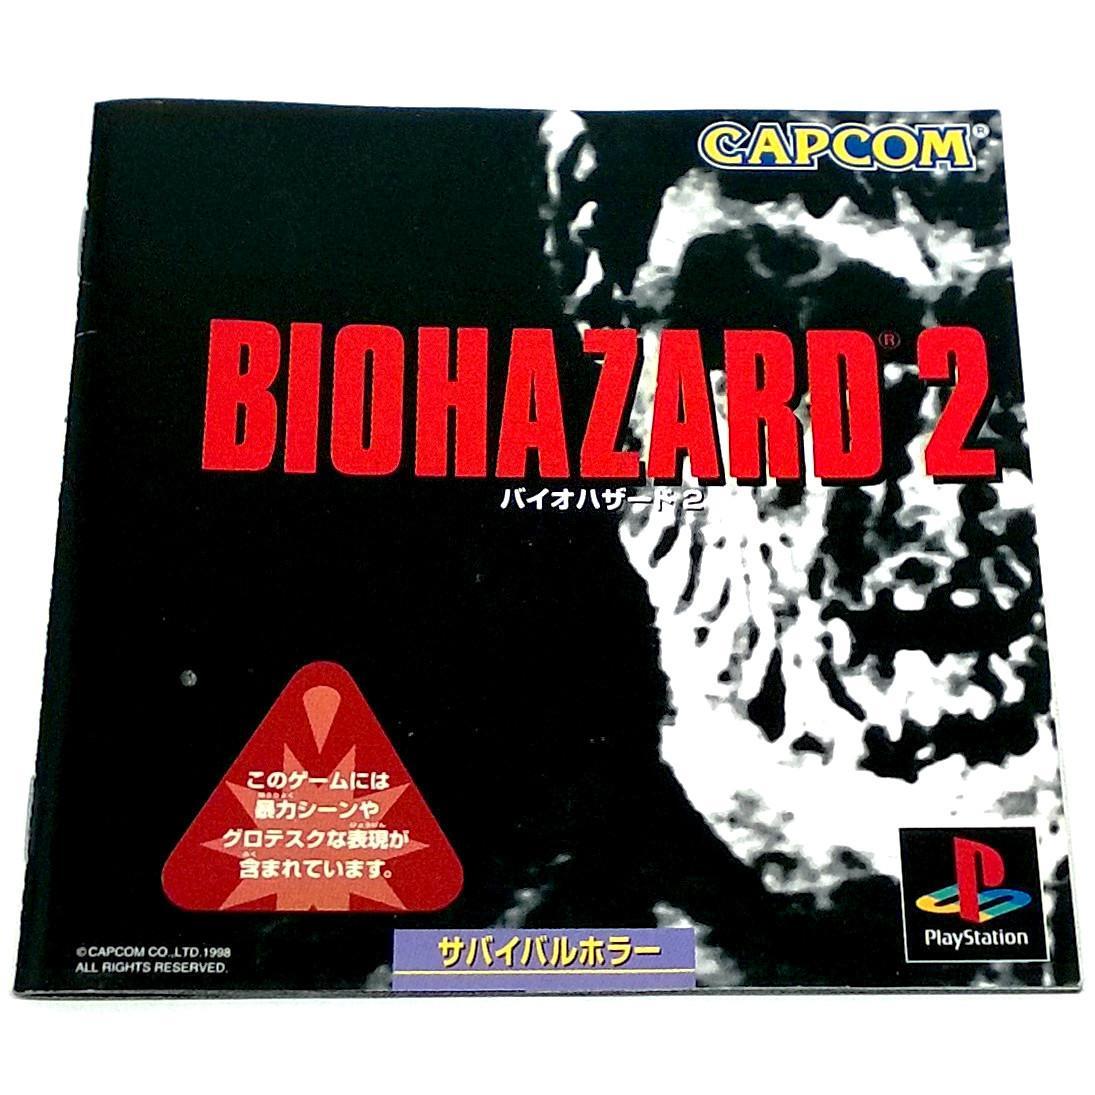 BioHazard 2 for PlayStation (import) - Front of manual